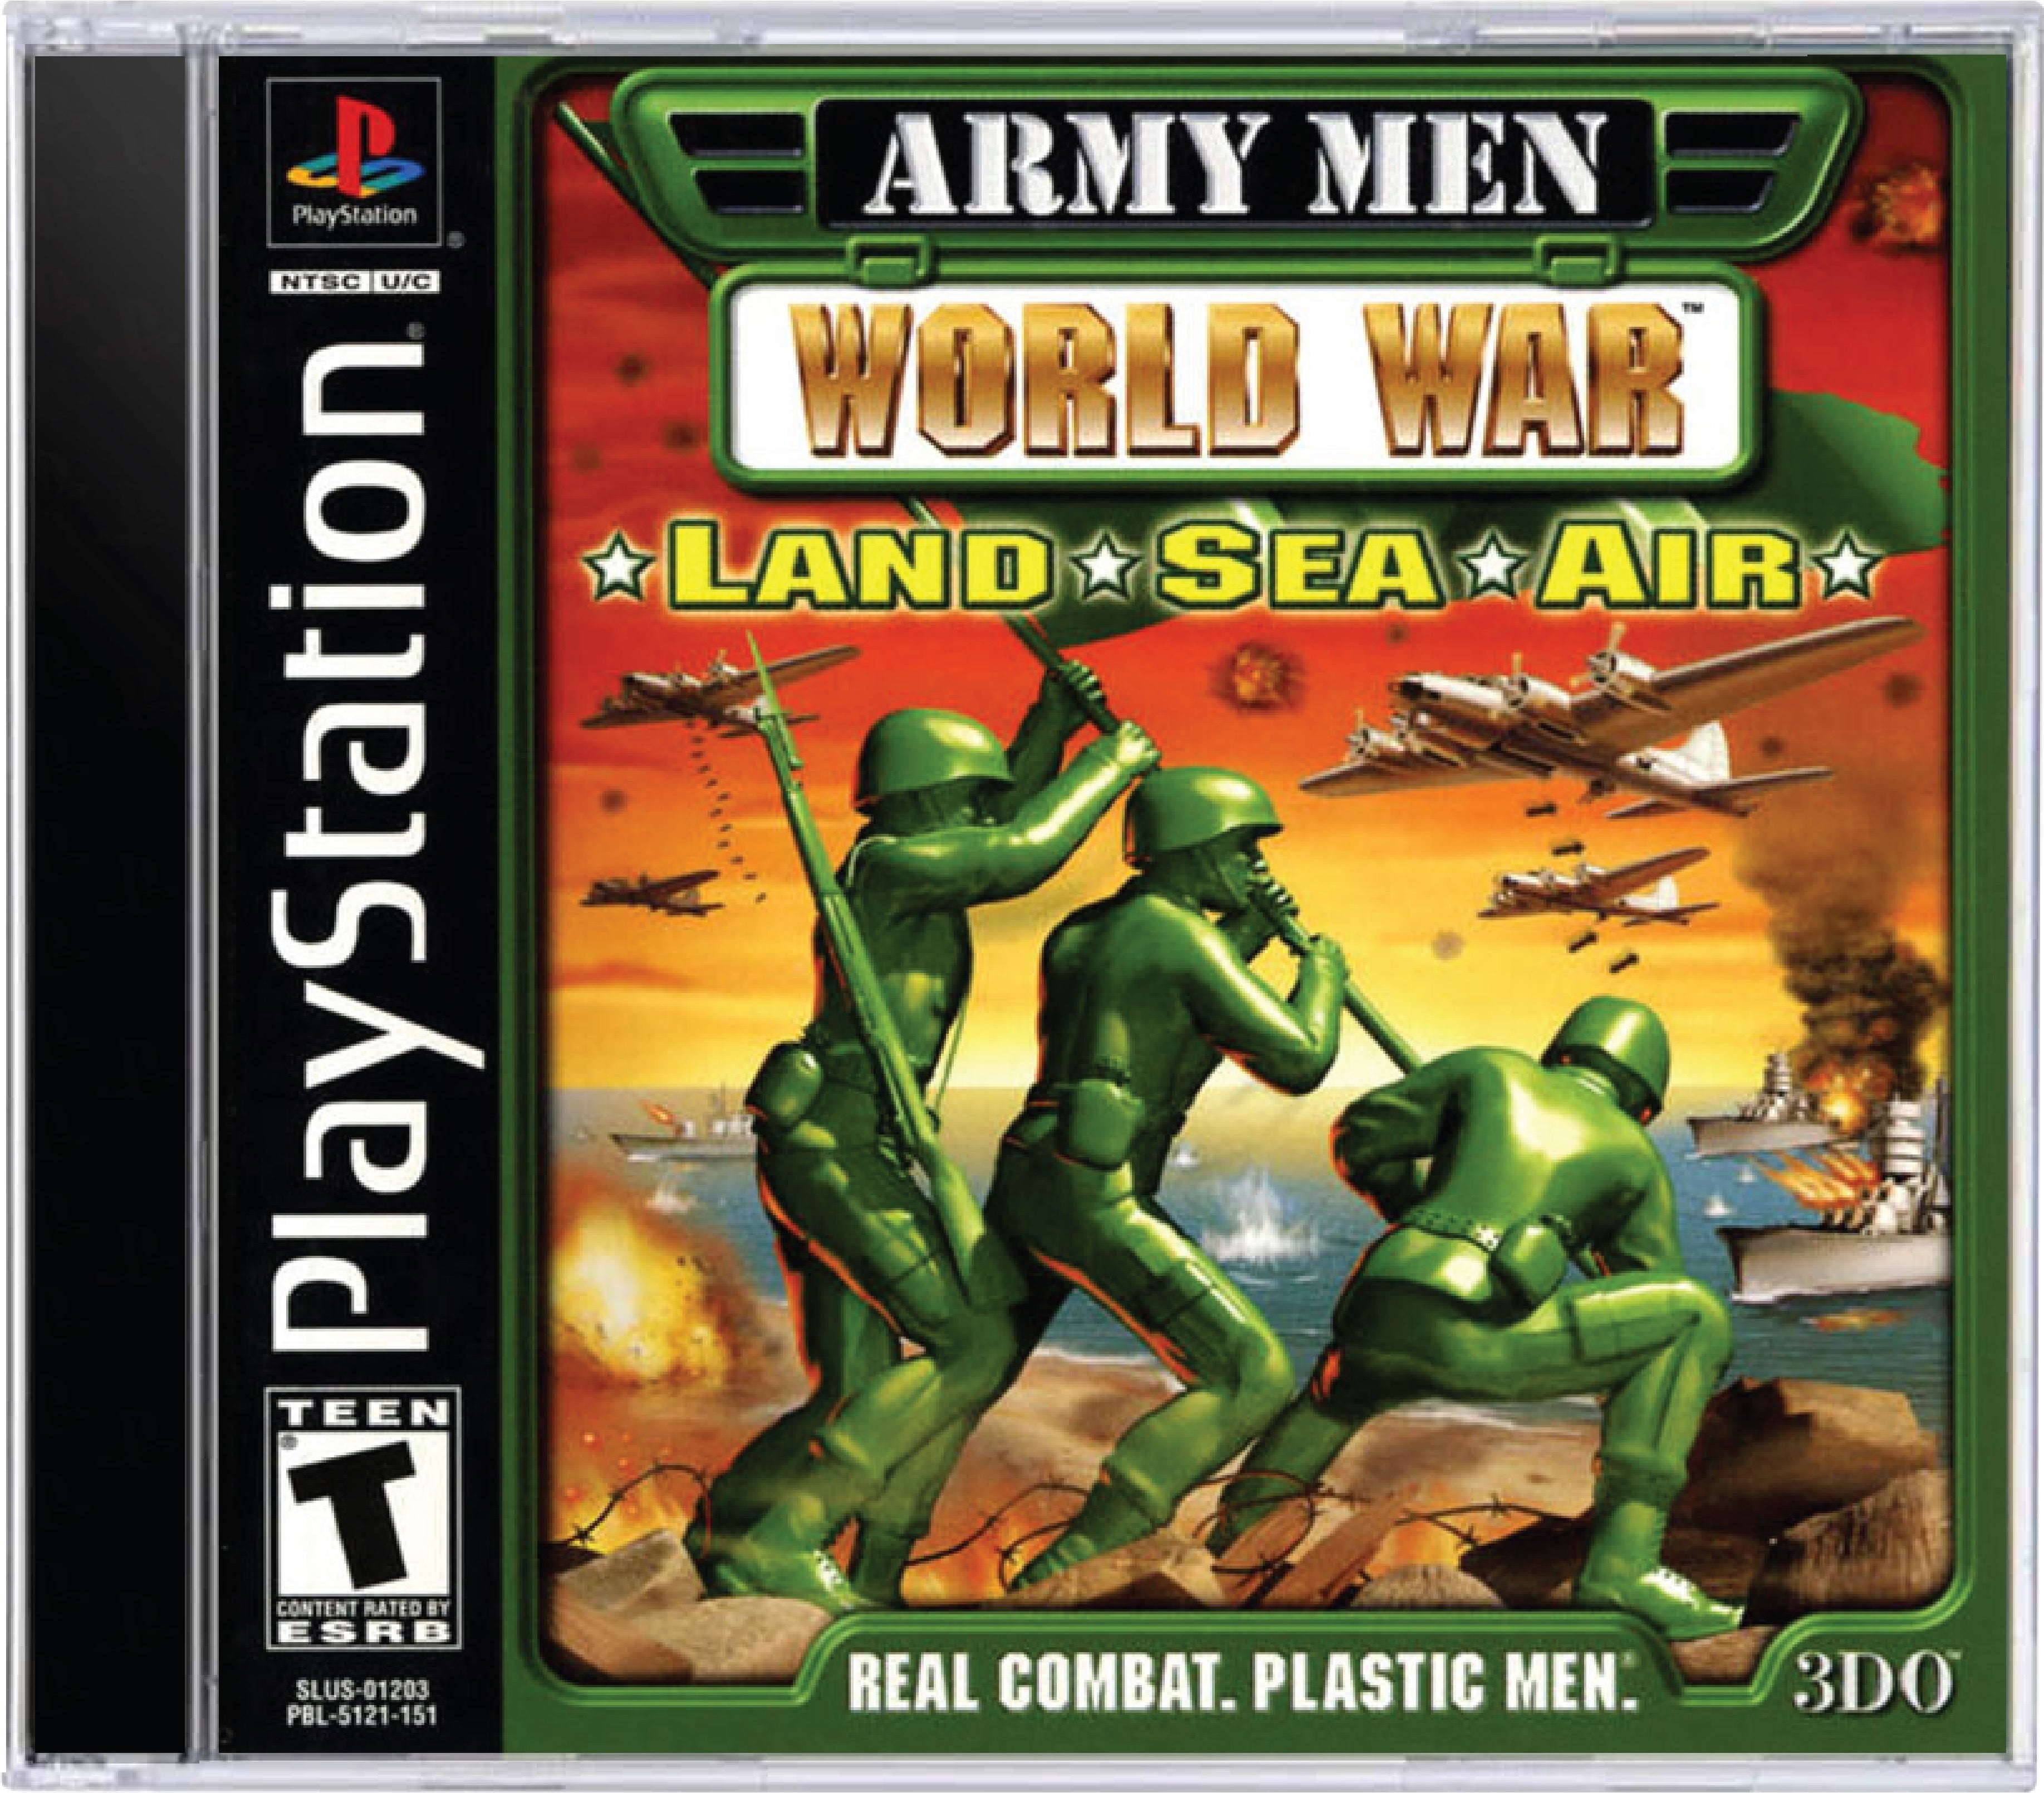 Army Men World War Land Sea Air Cover Art and Product Photo